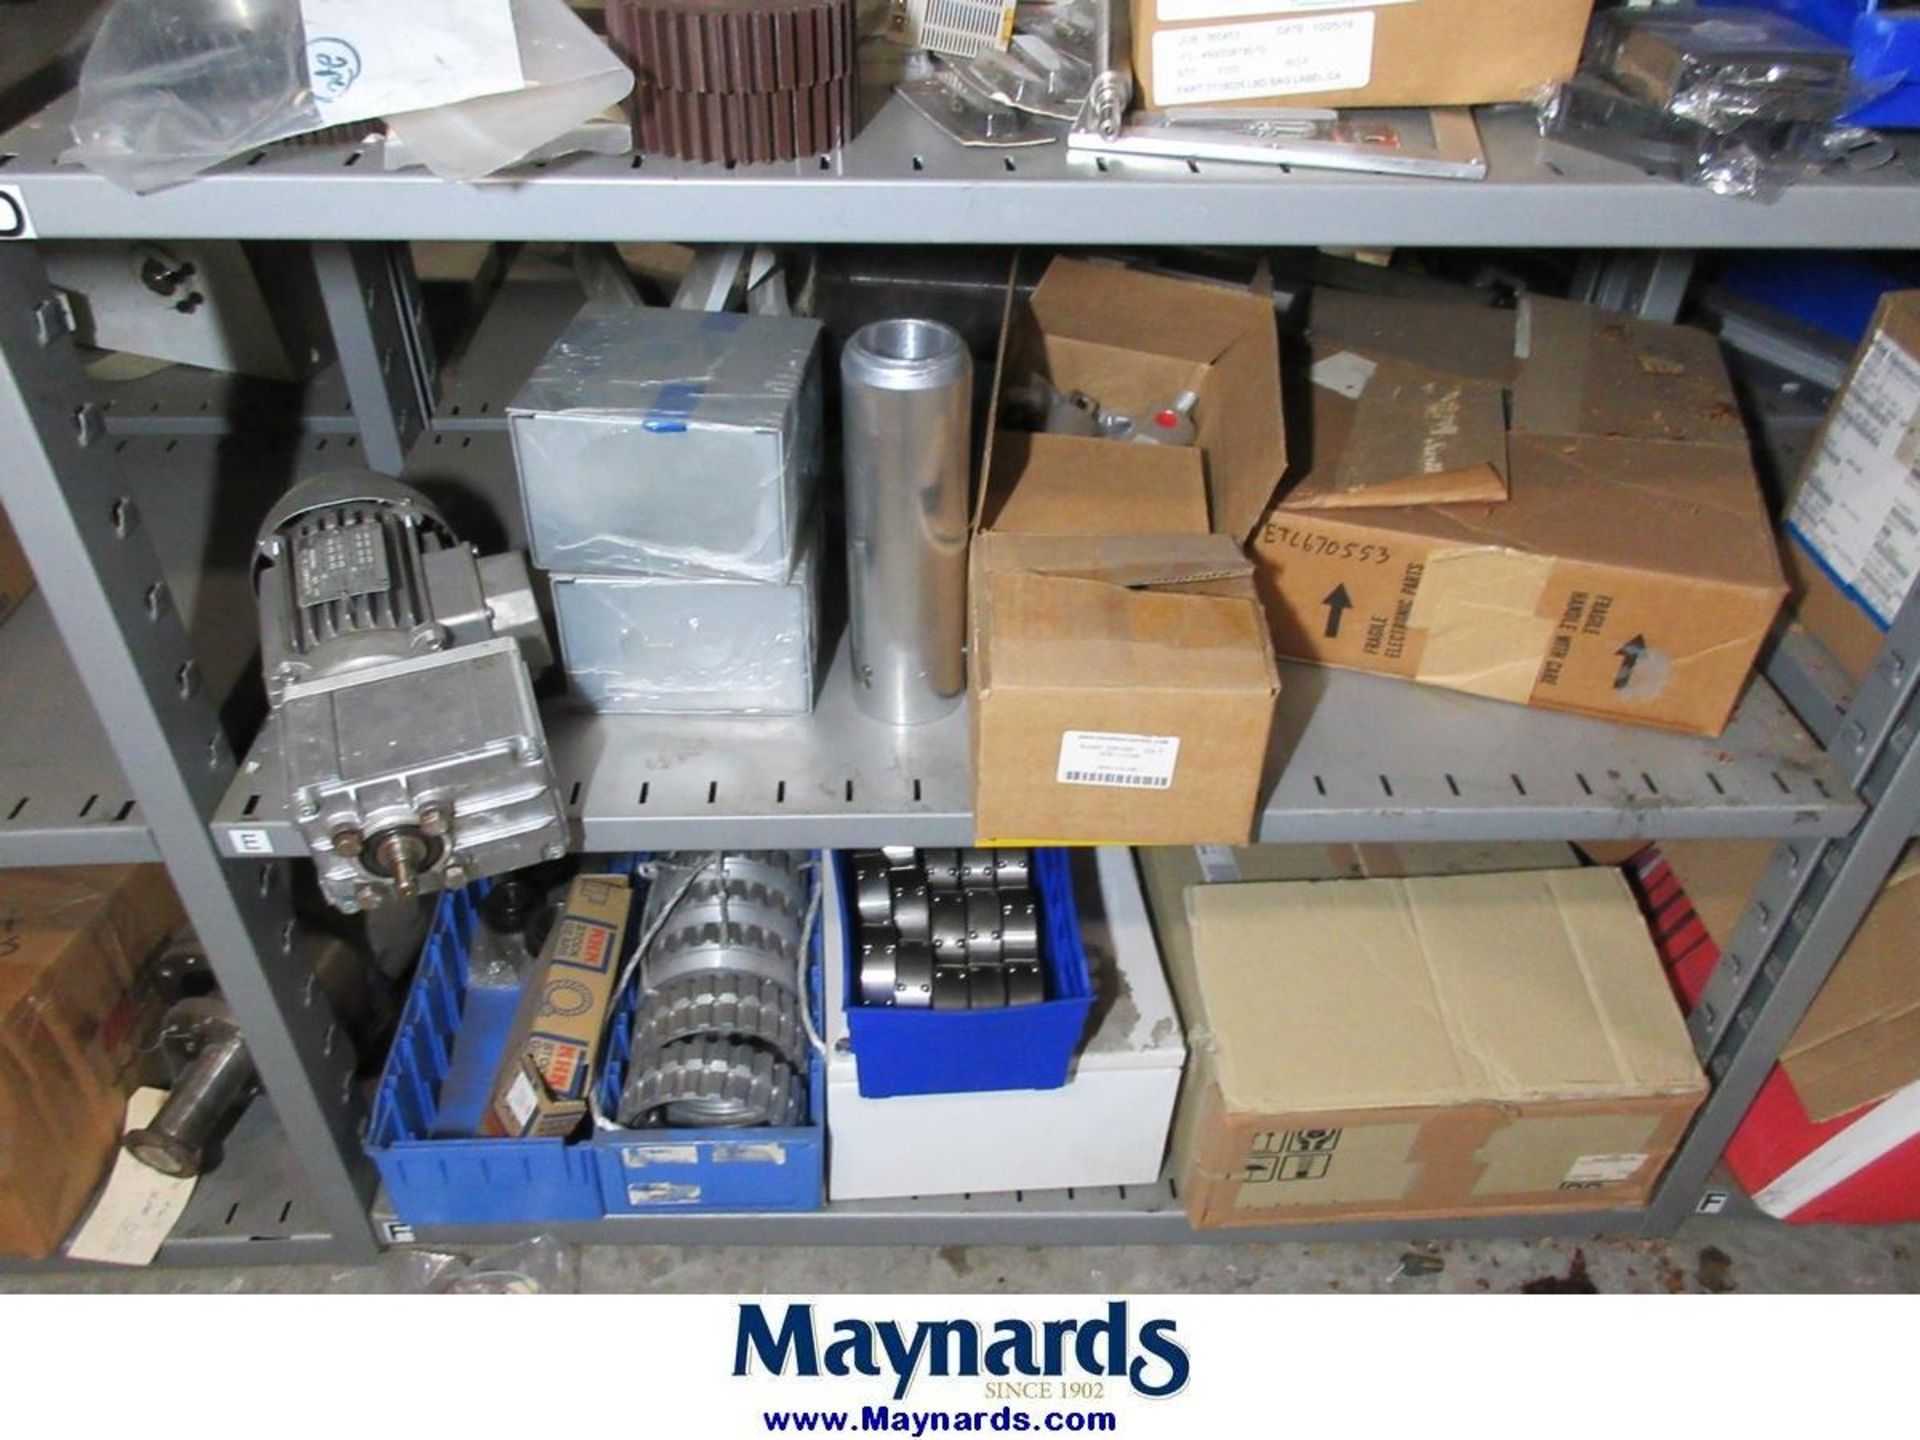 Large Lot of Electrical Controls, PLC's, Drives & Remaining Contents of Maint. Parts Crib - Image 11 of 107